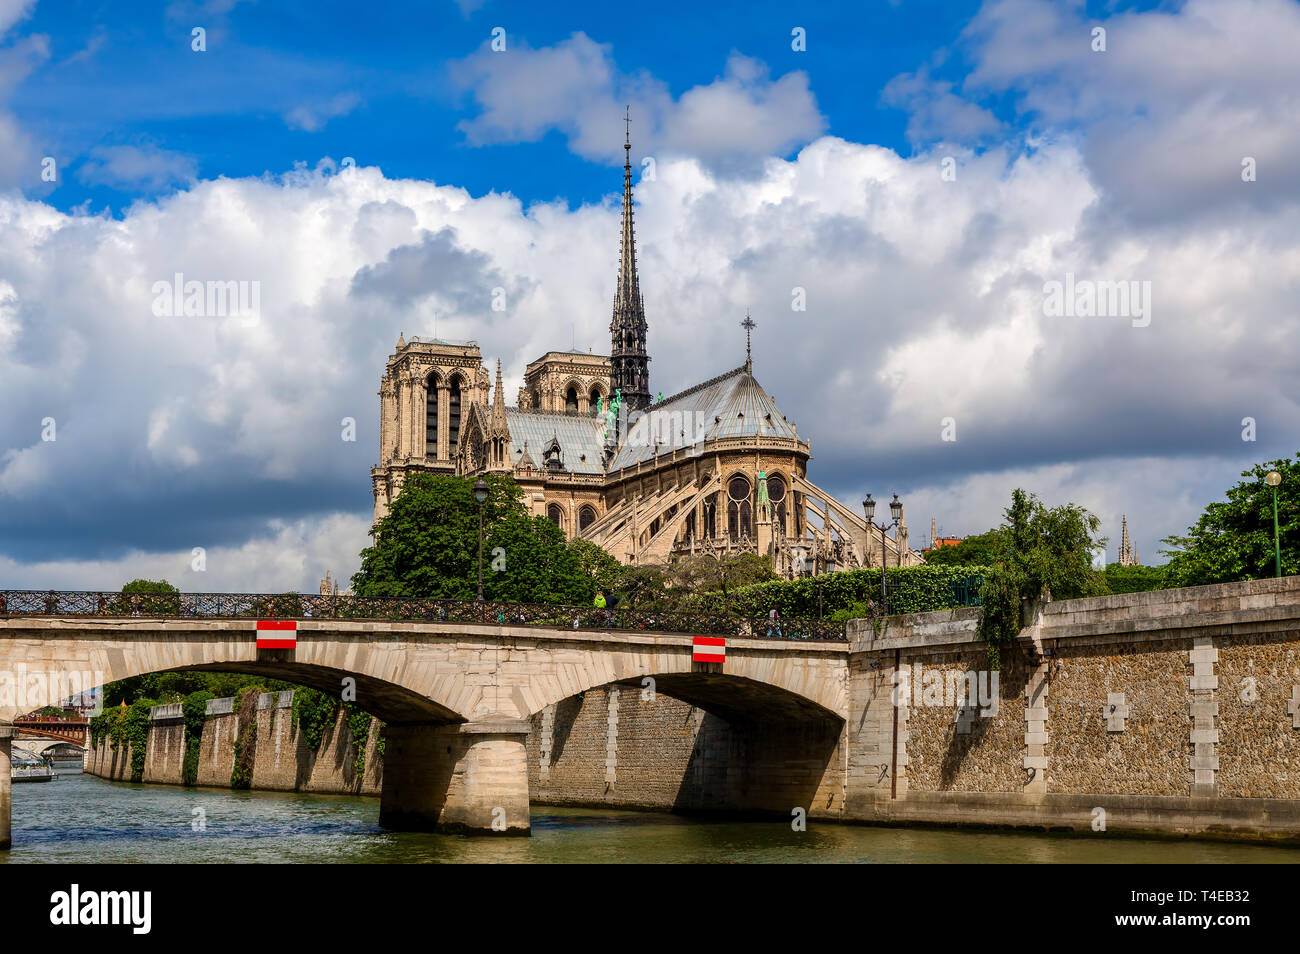 View of bridge over Seine river and famous Notre-Dame cathedral under beautiful sky in Paris, France. Stock Photo